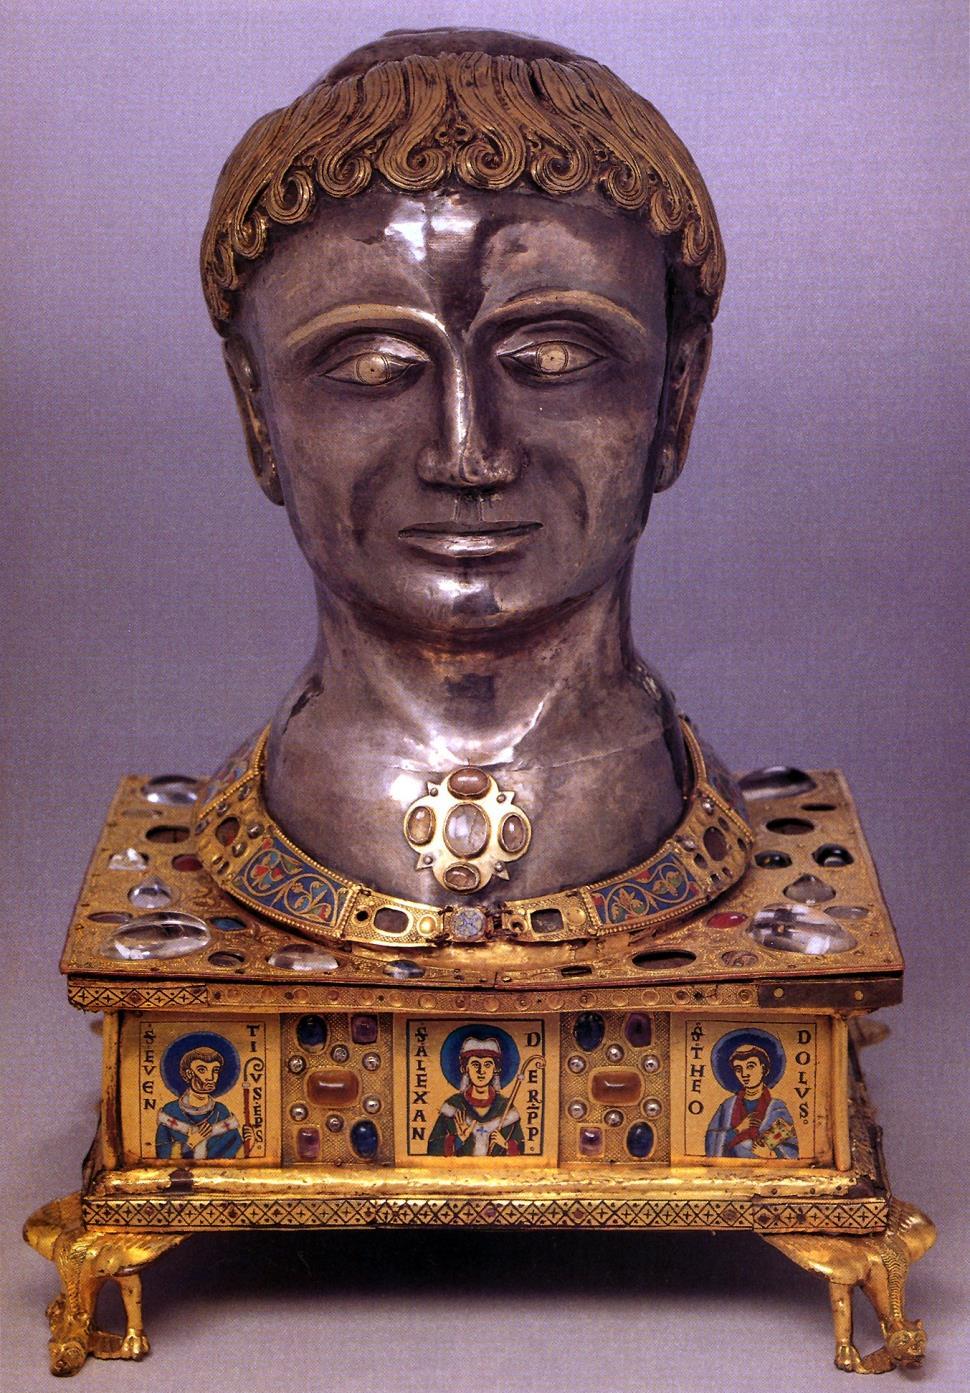 Head Reliquary of Saint Alexander from Stavelot Abbey, Belgium